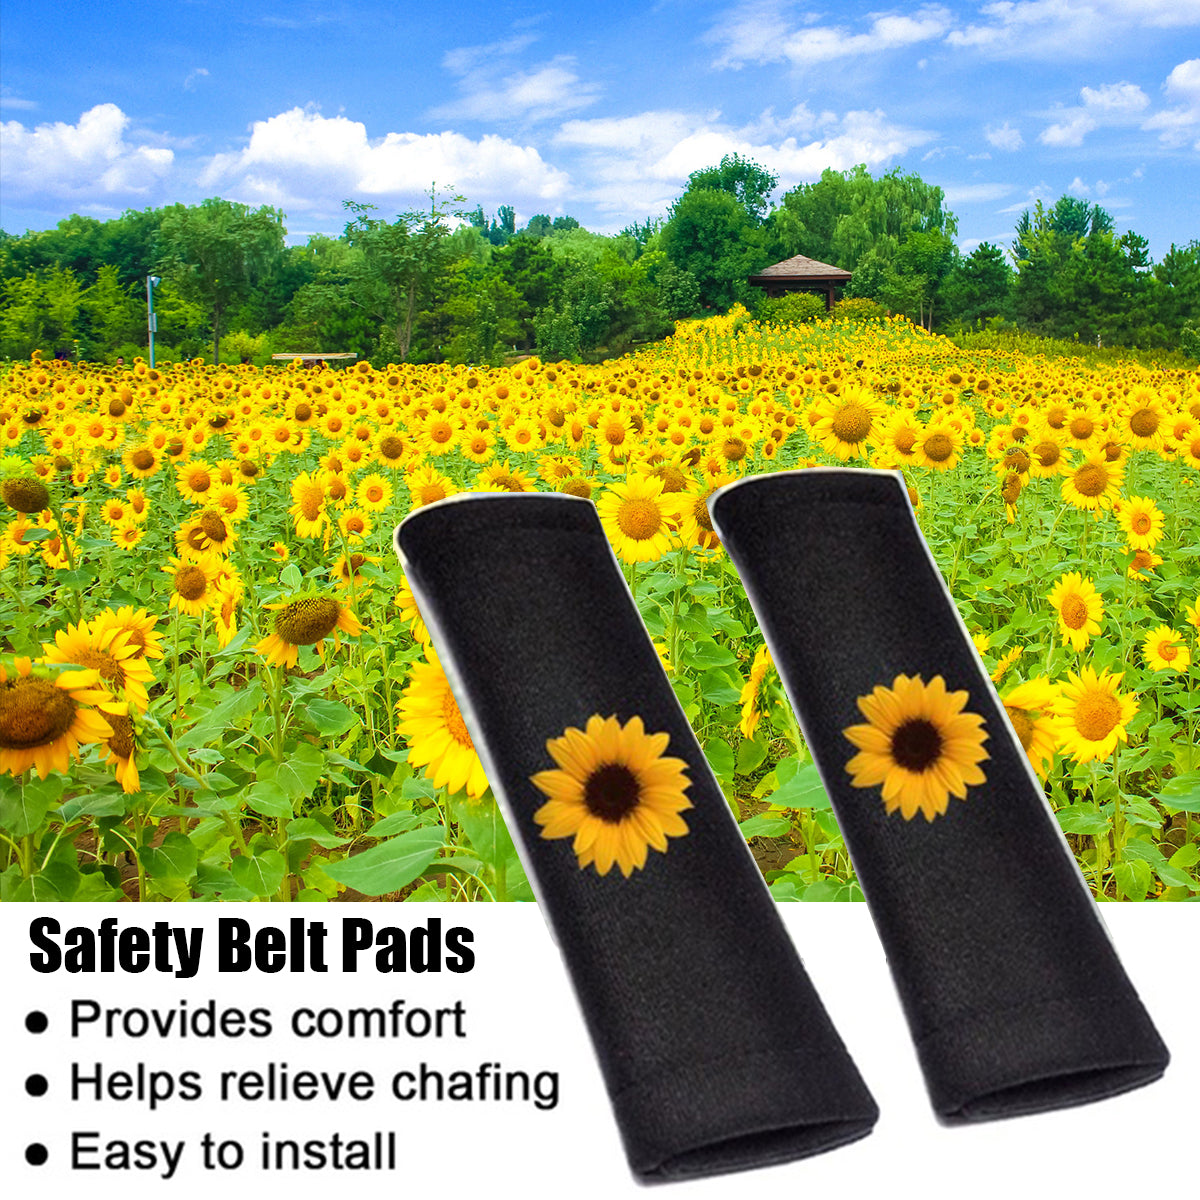 Car Steering Wheel Covers Plush Sunflower Protector